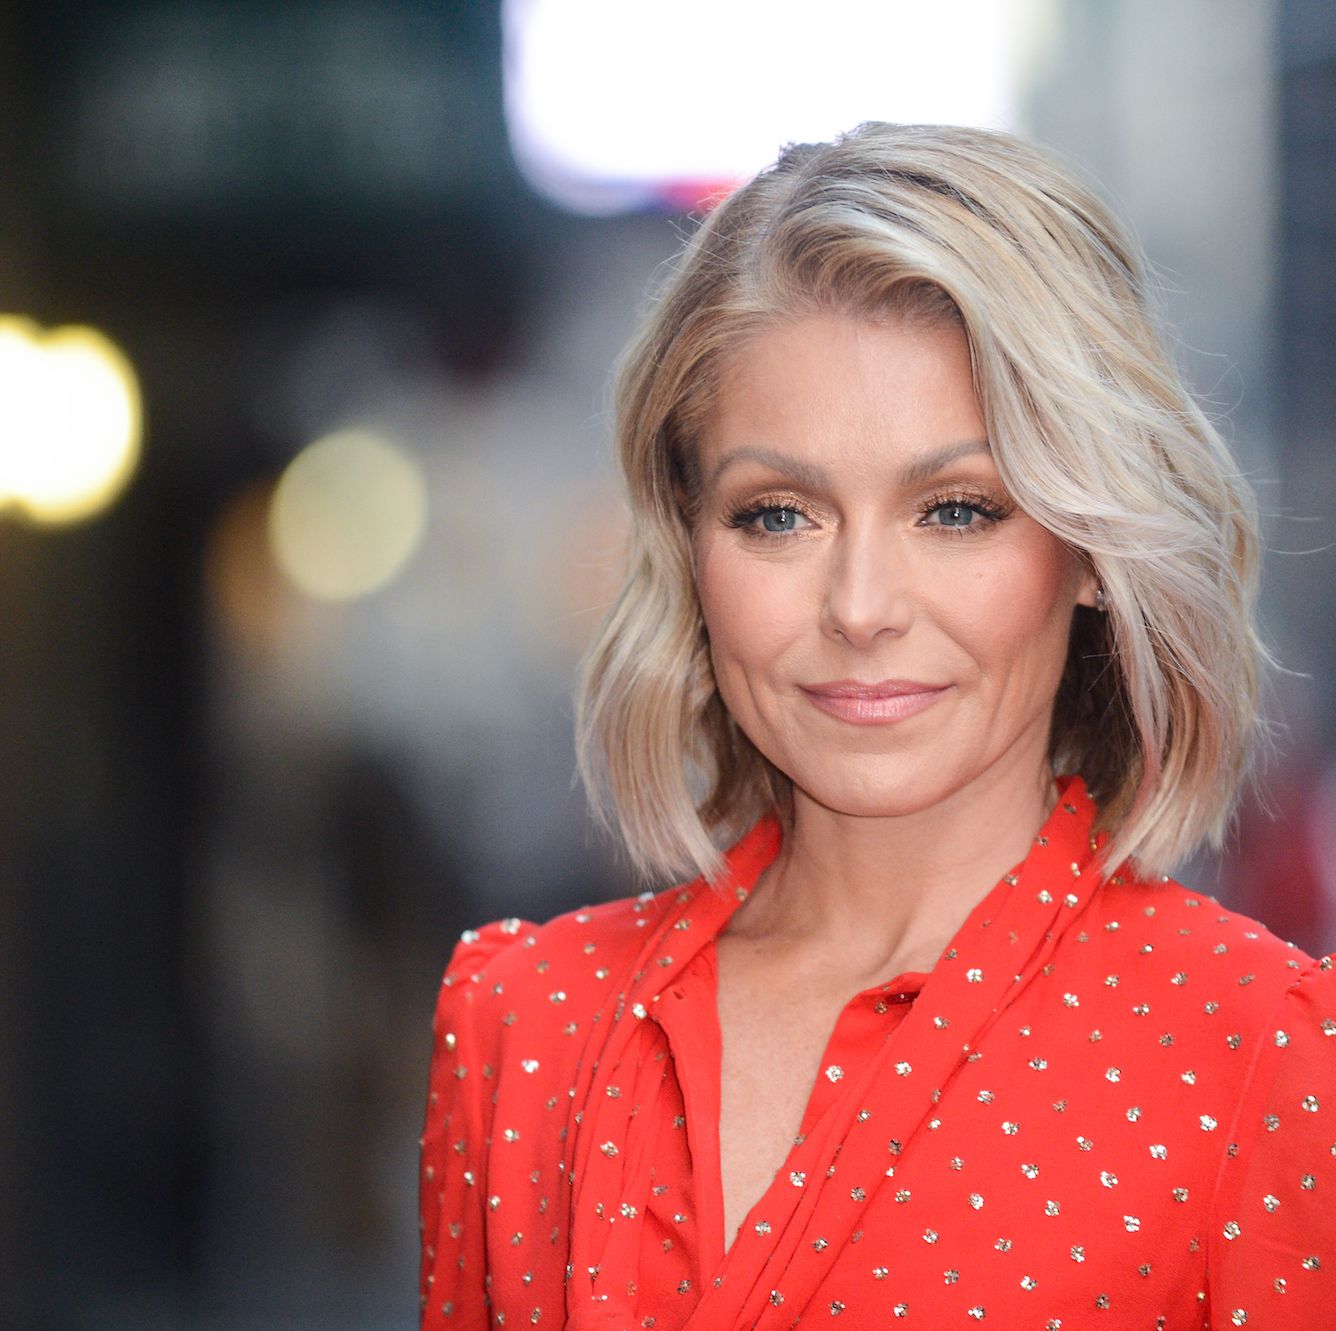 Kelly Ripa, 52, Shares the 'Brightening' Cleansing Pads She's 'Really Into'